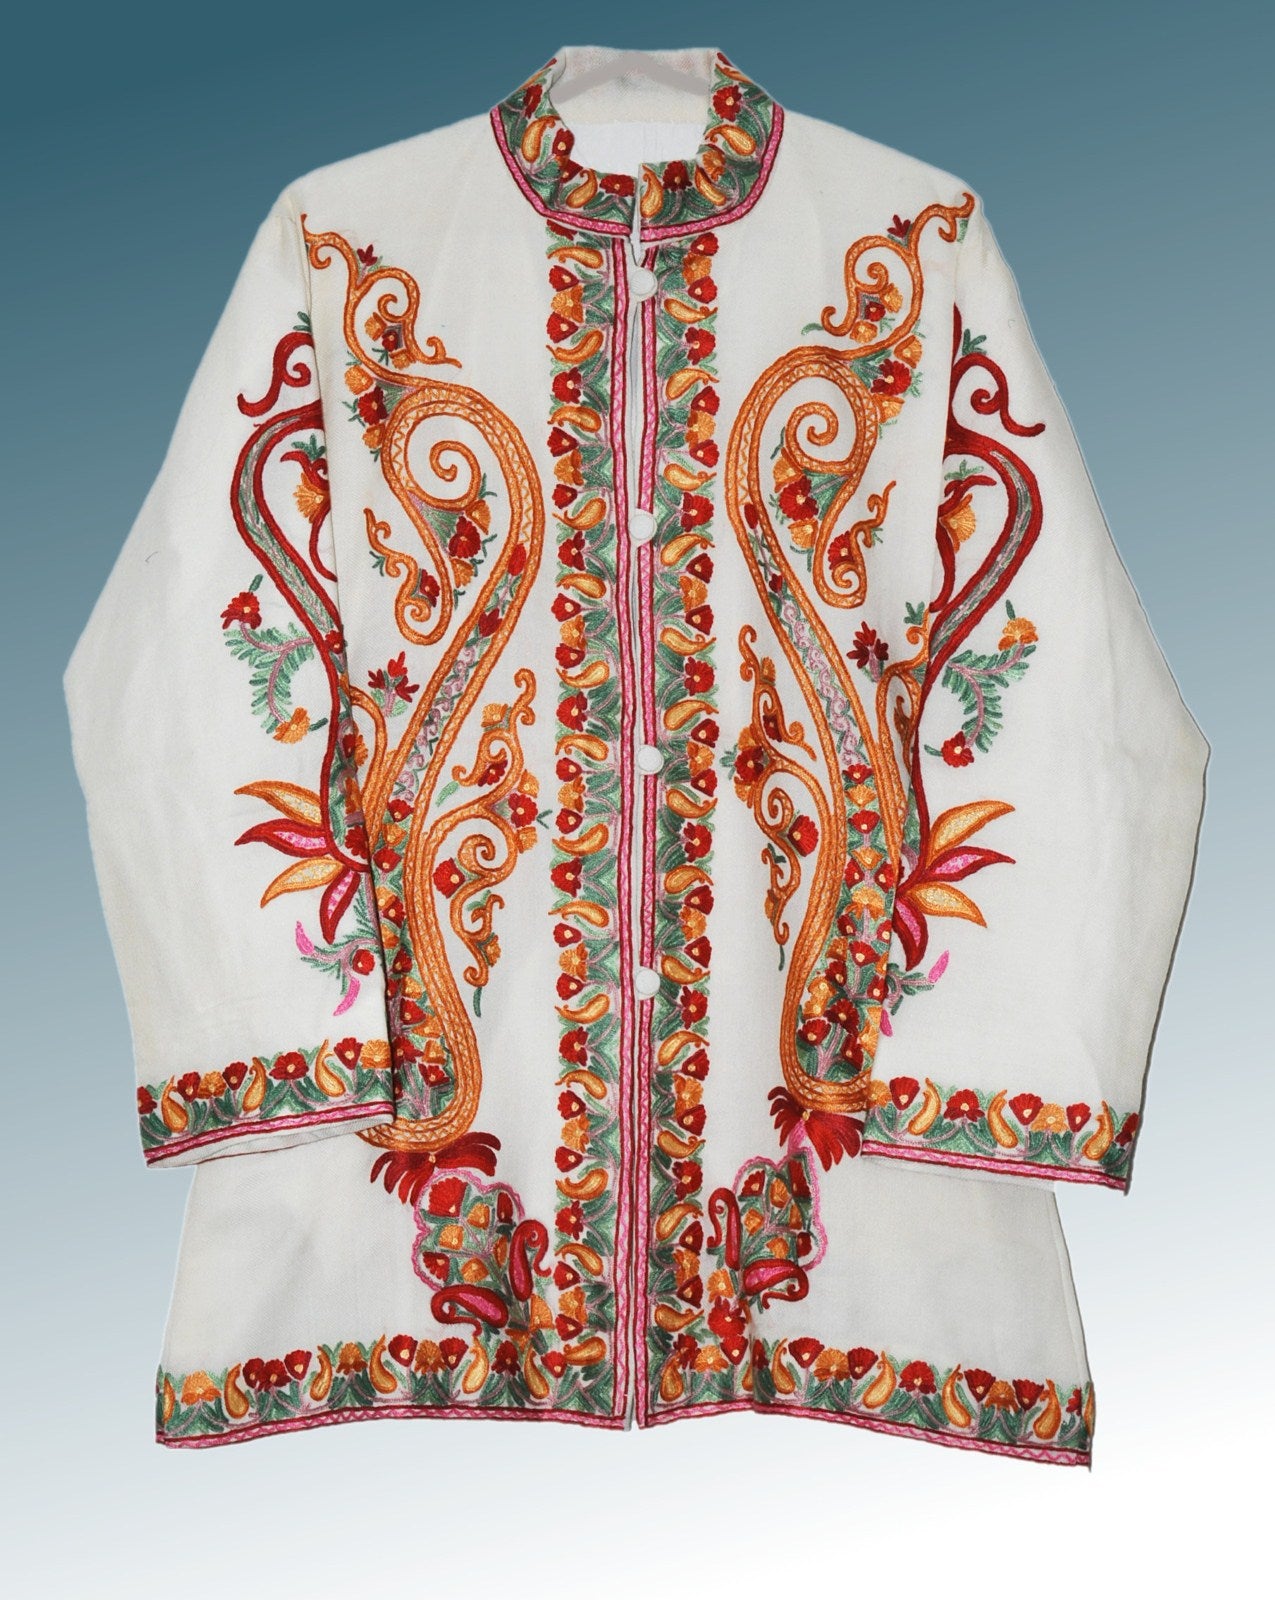 Embroidered Woolen Jacket White, Multicolor Embroidery #AO-0191